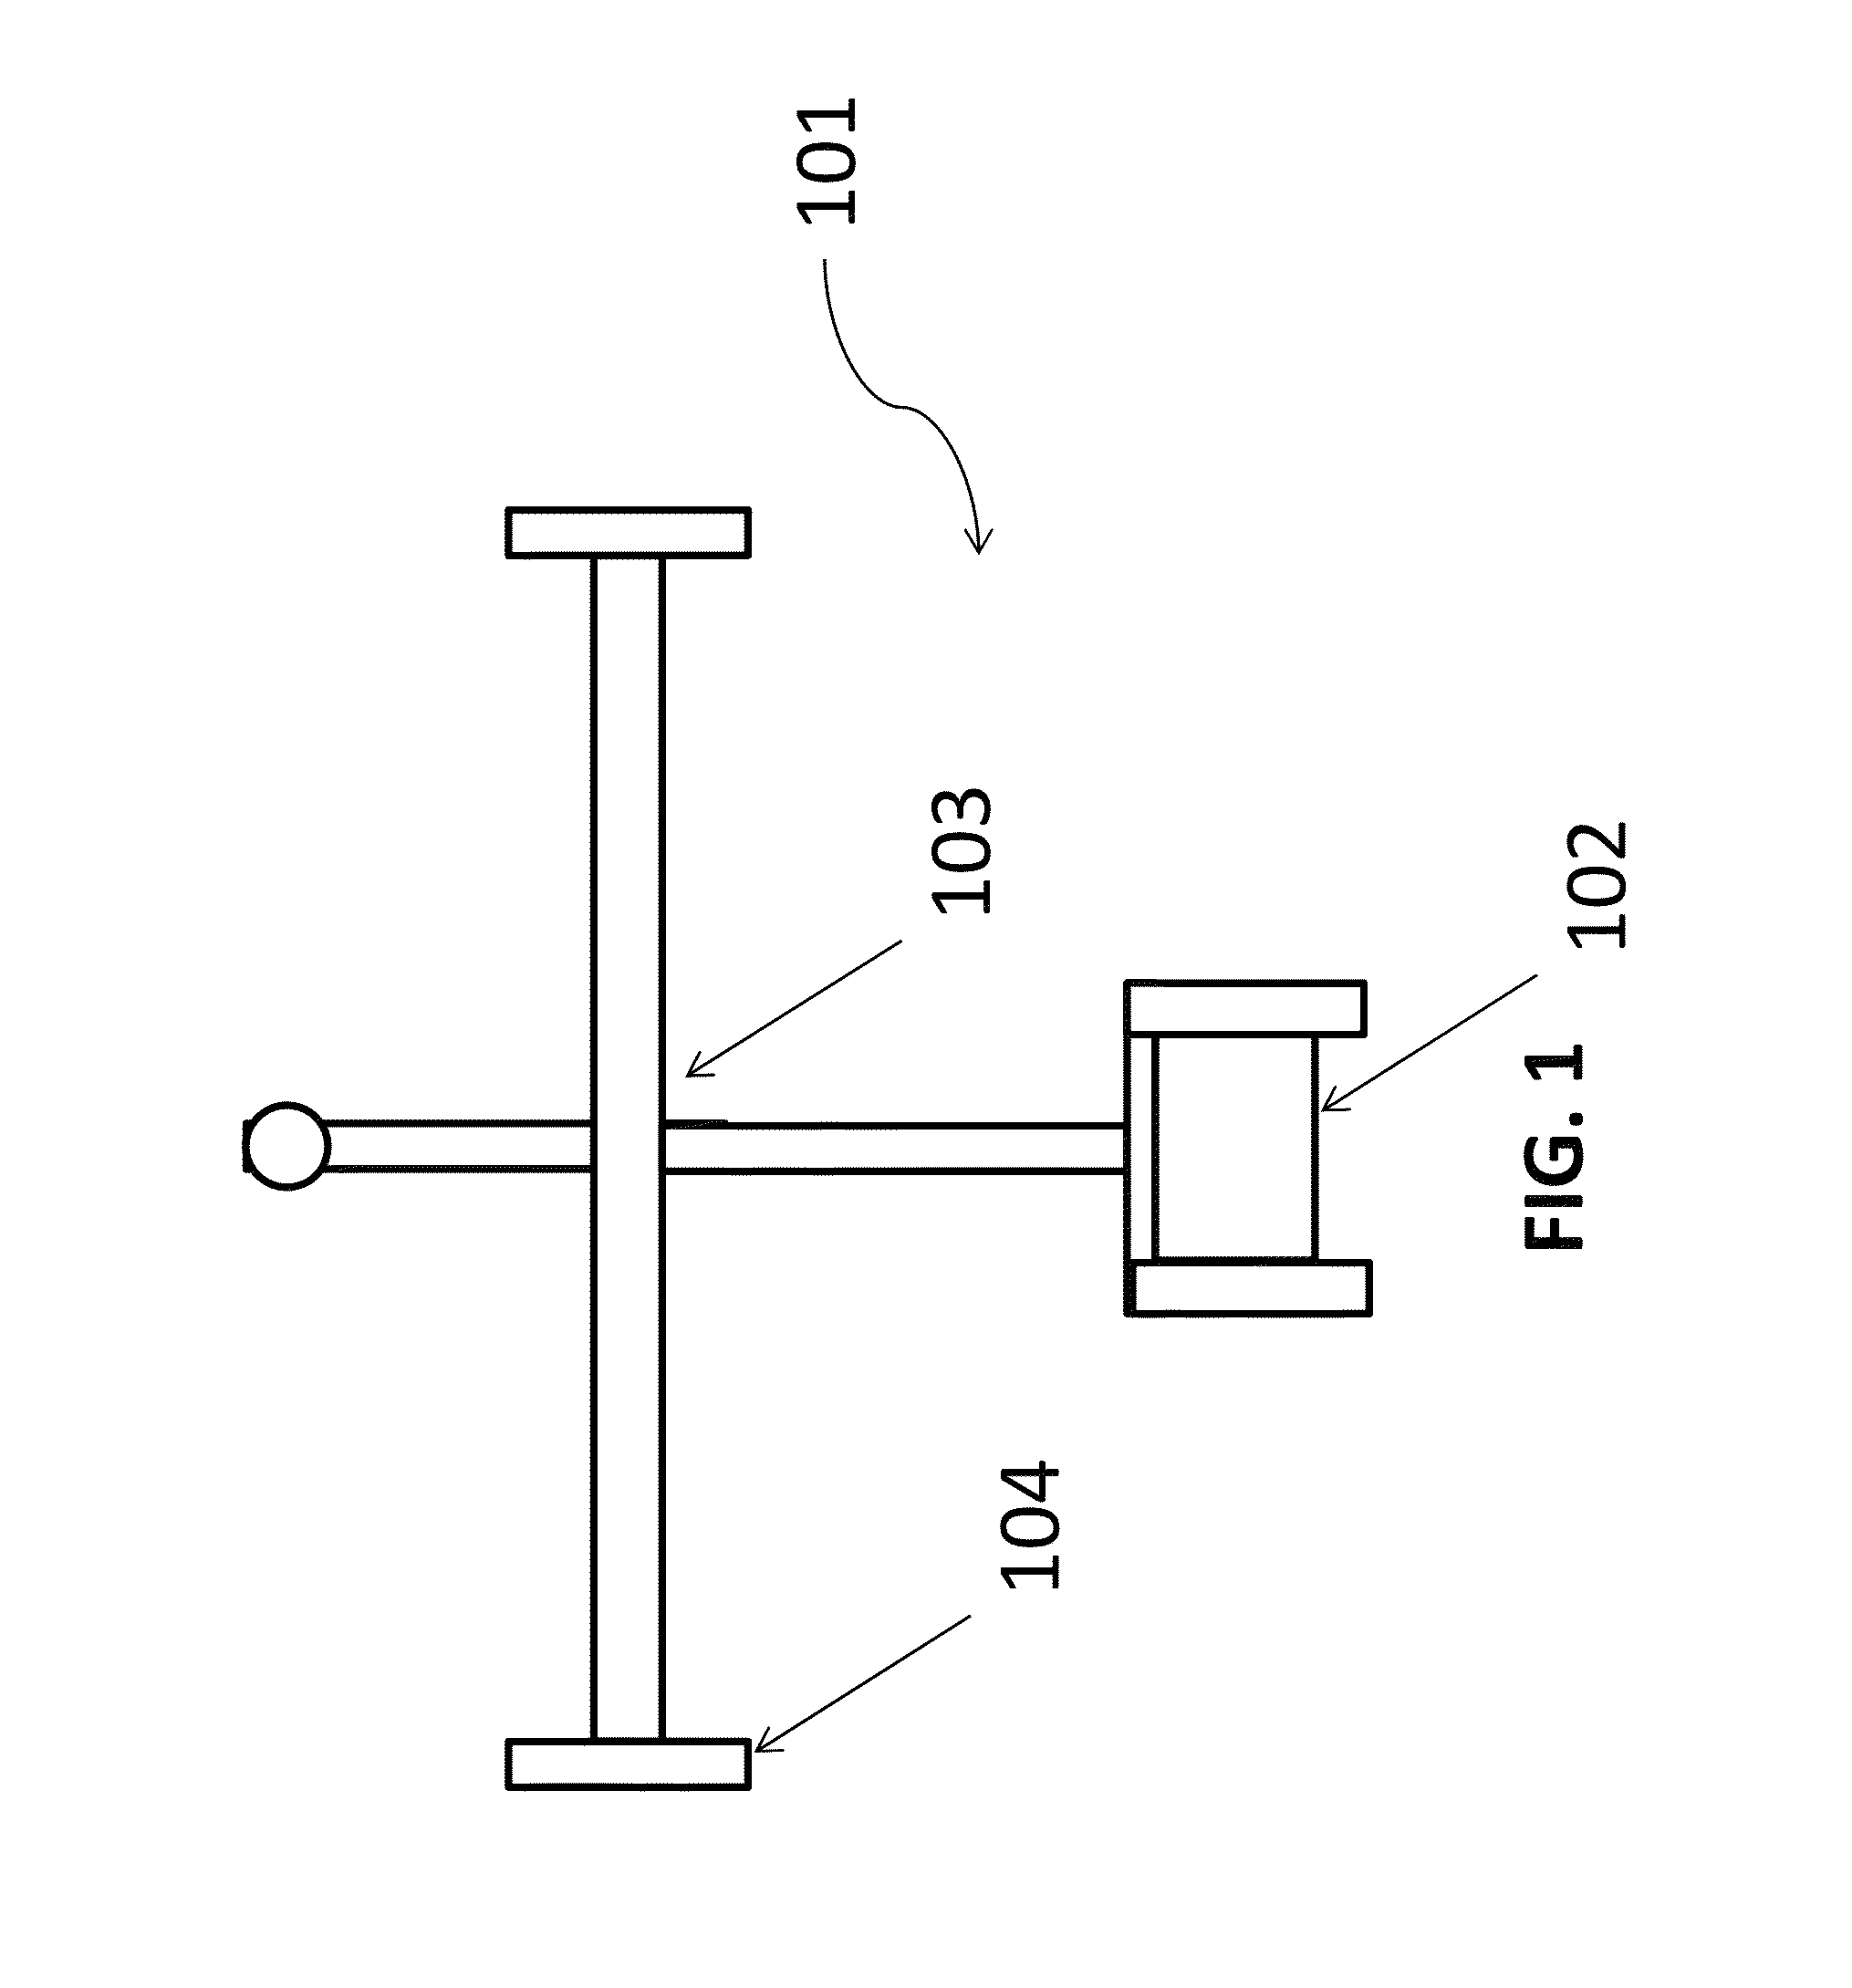 Systems and methods for payload stabilization